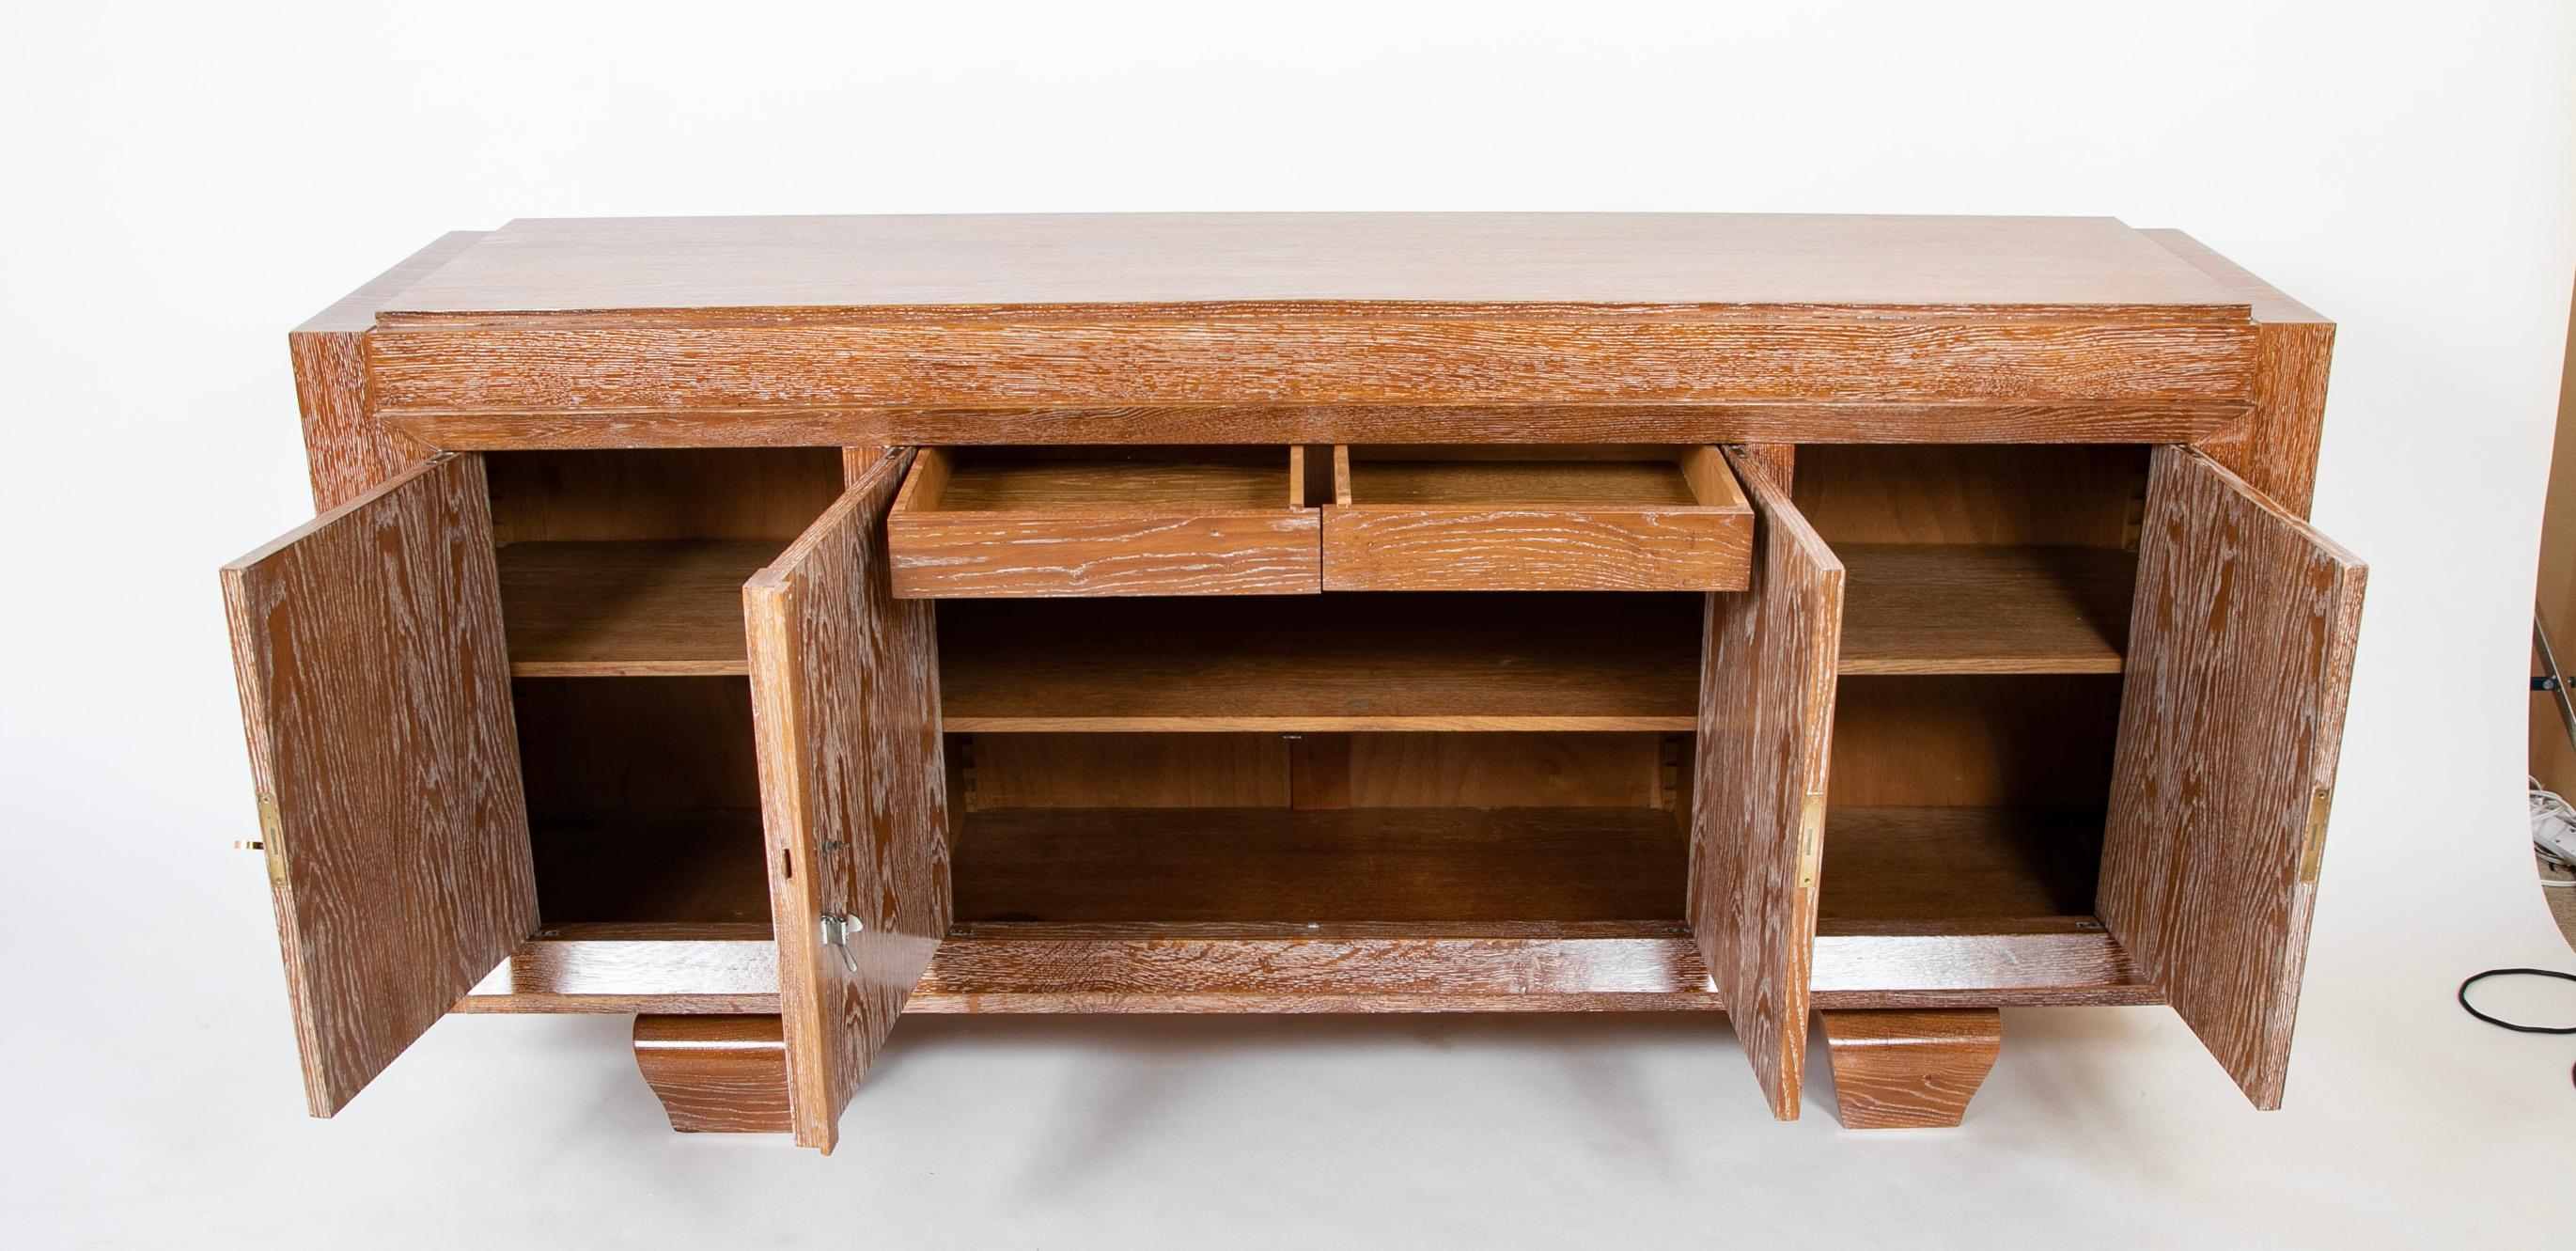 A Mid-Century French Cerused Oak Sideboard In The Manner of Jean Royere For Sale 4